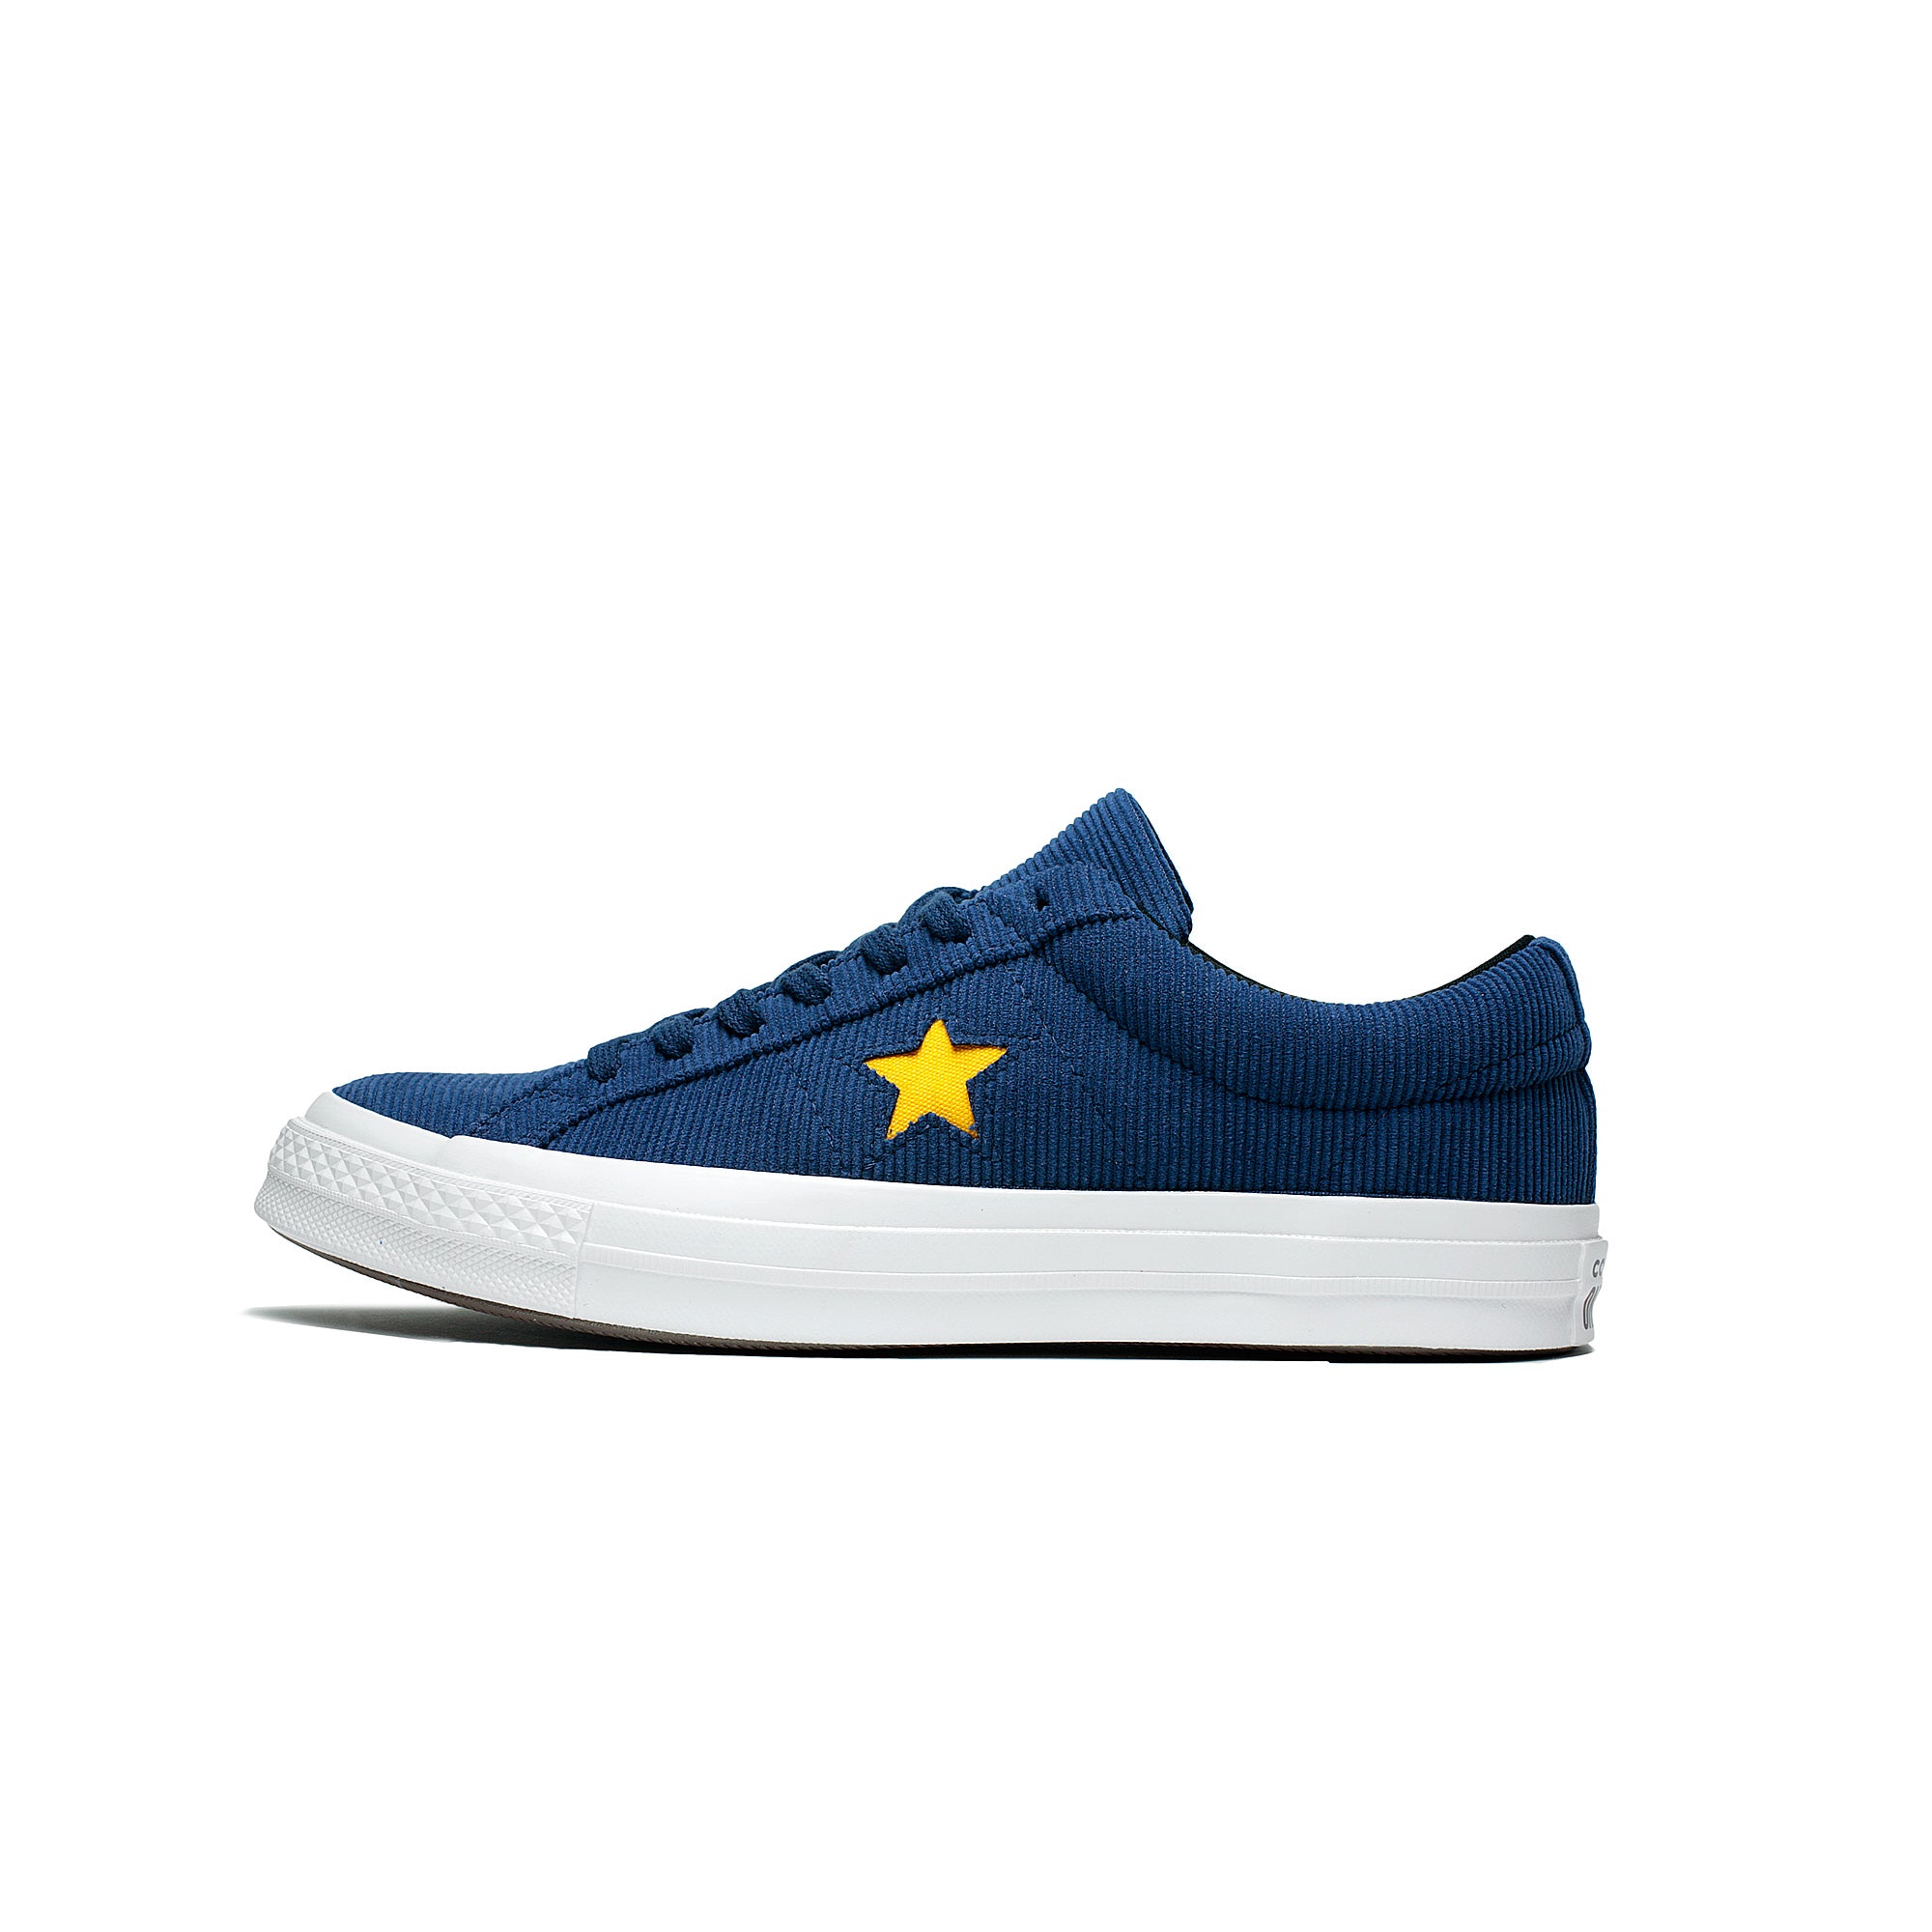 Converse One Star Ox [161633C] – Extra Butter